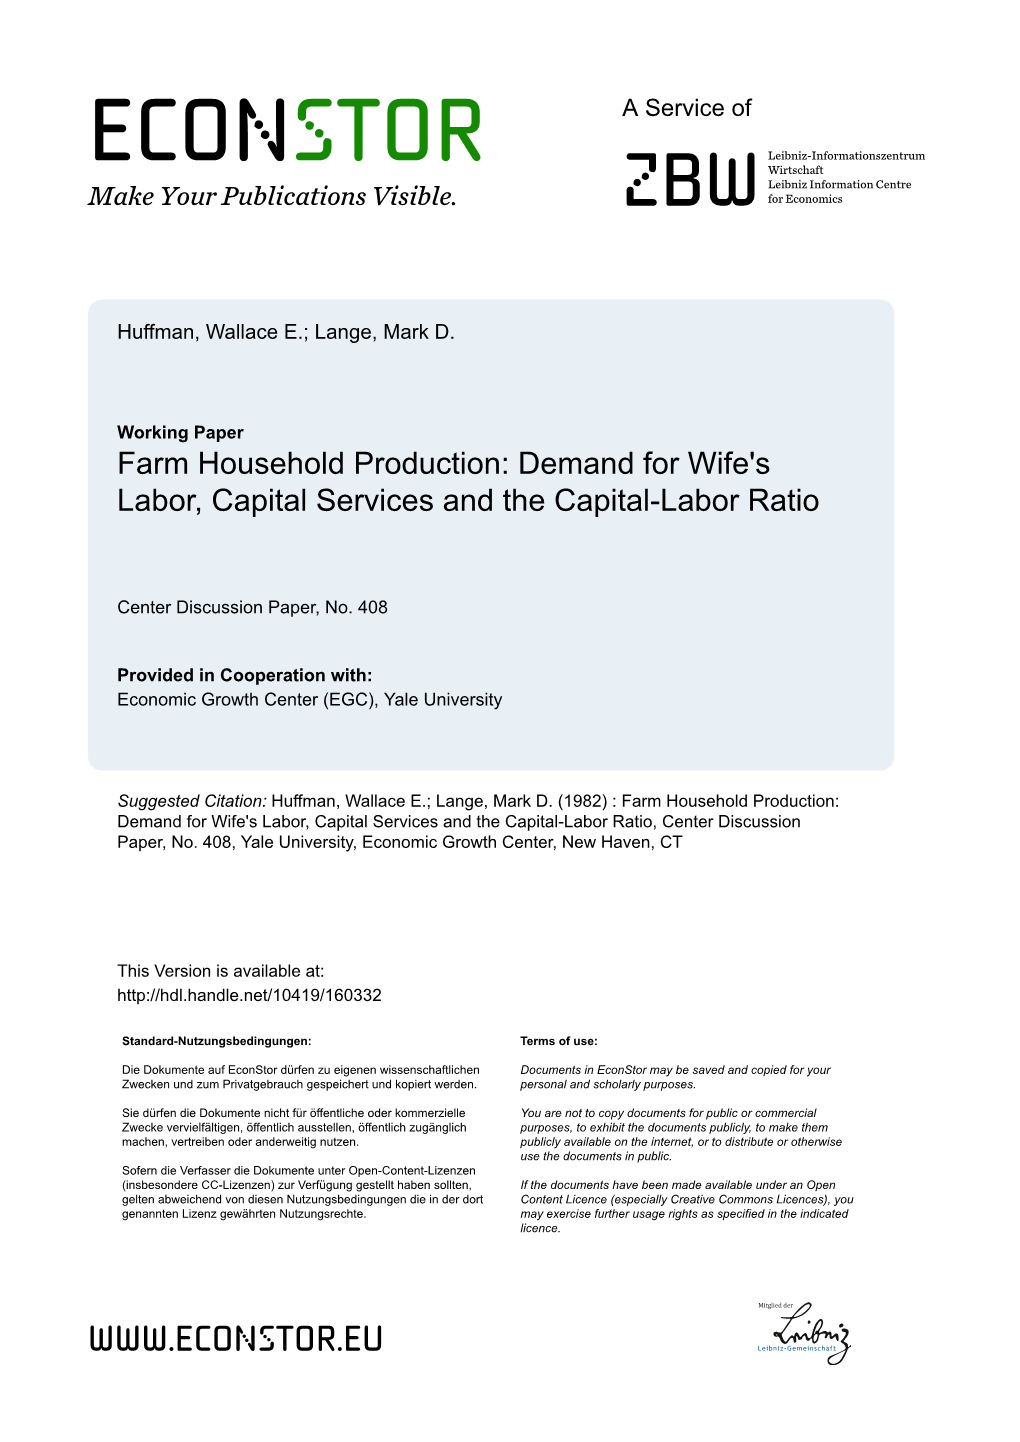 Demand for Wife's Labor, Capital Services and the Capital-Labor Ratio